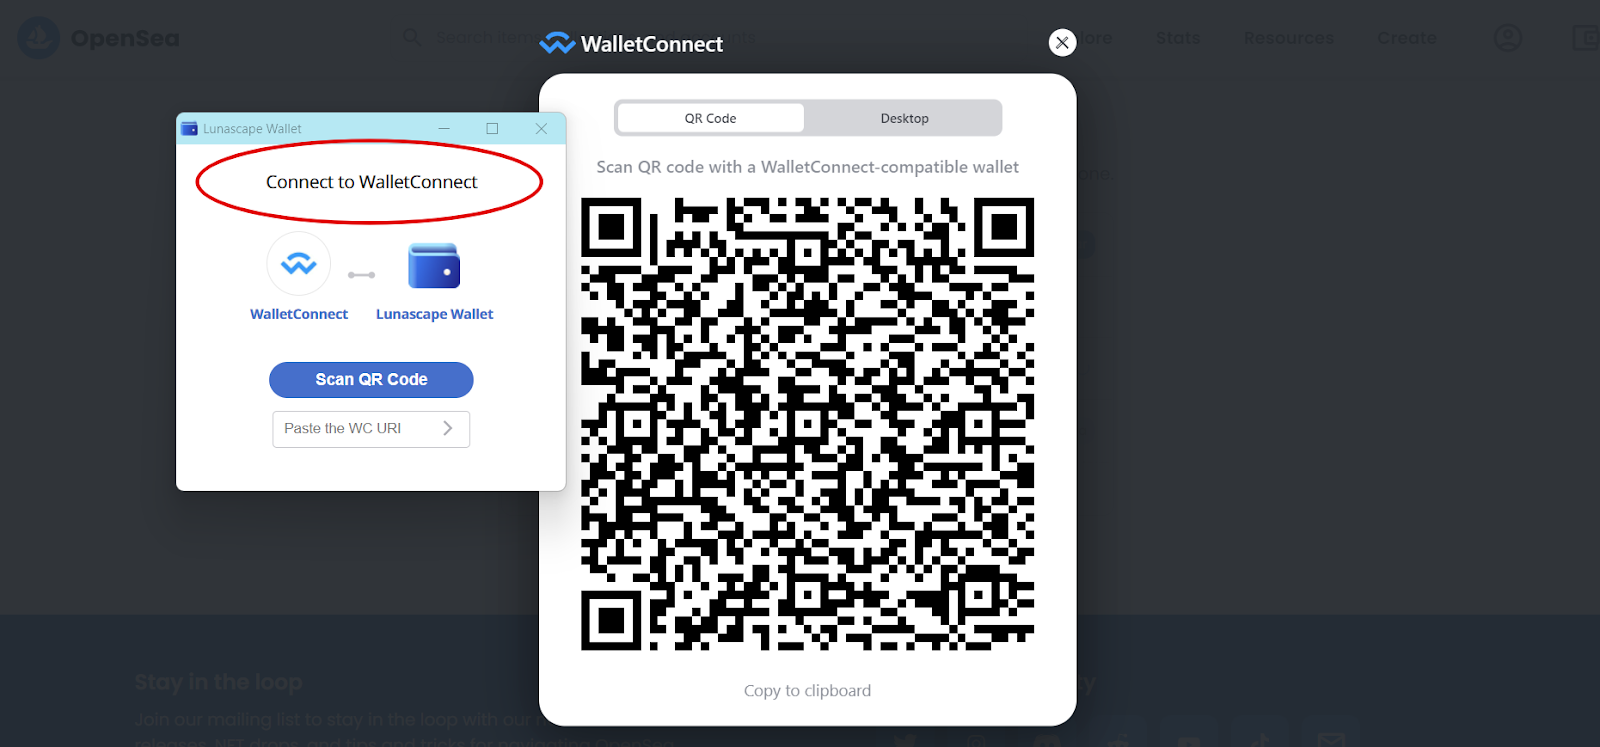 Lunascape Wallet Ver. 1.2.0, supporting WalletConnect and EIP-3085